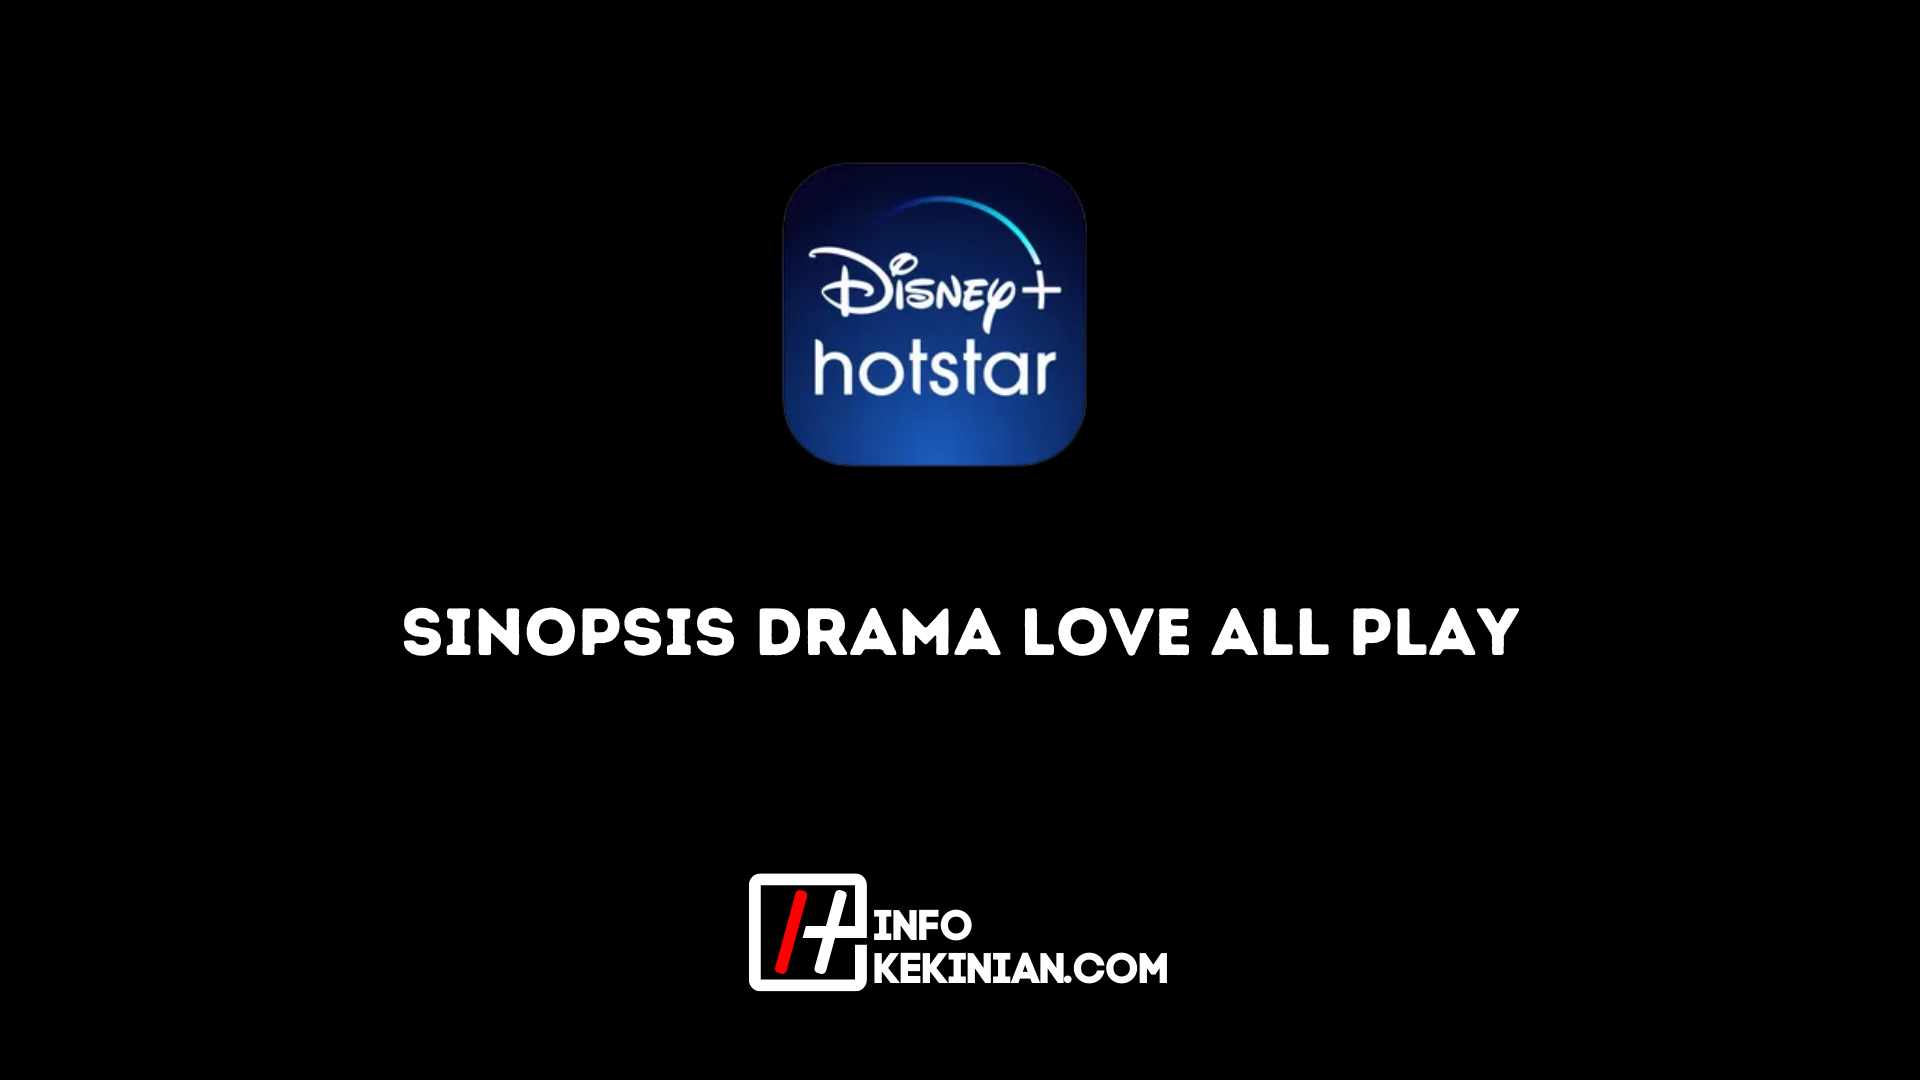 Synopsis Drama Love All Play